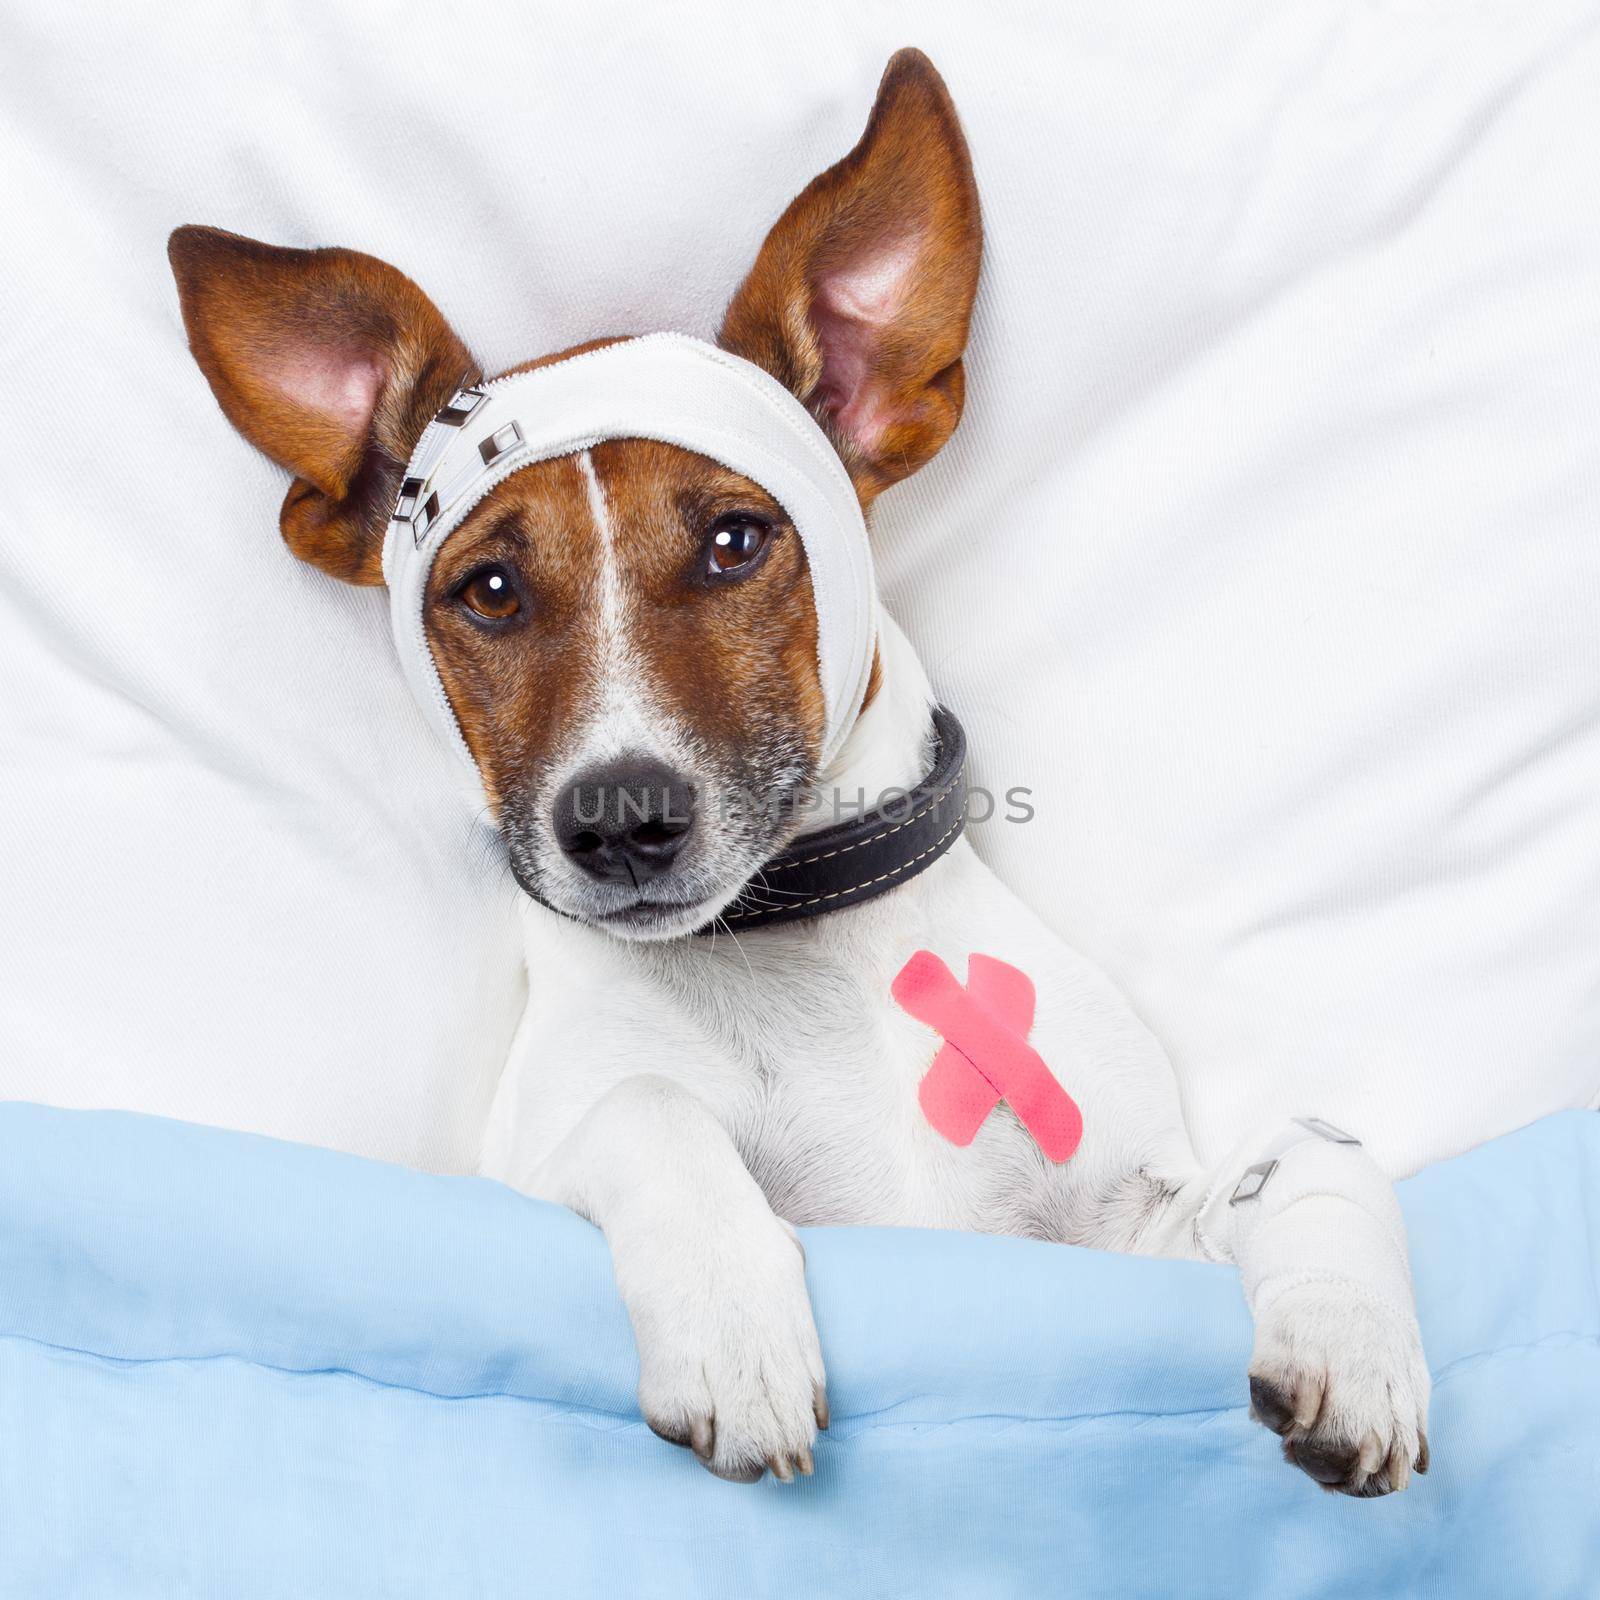 Sick dog with bandages lying on bed by Brosch